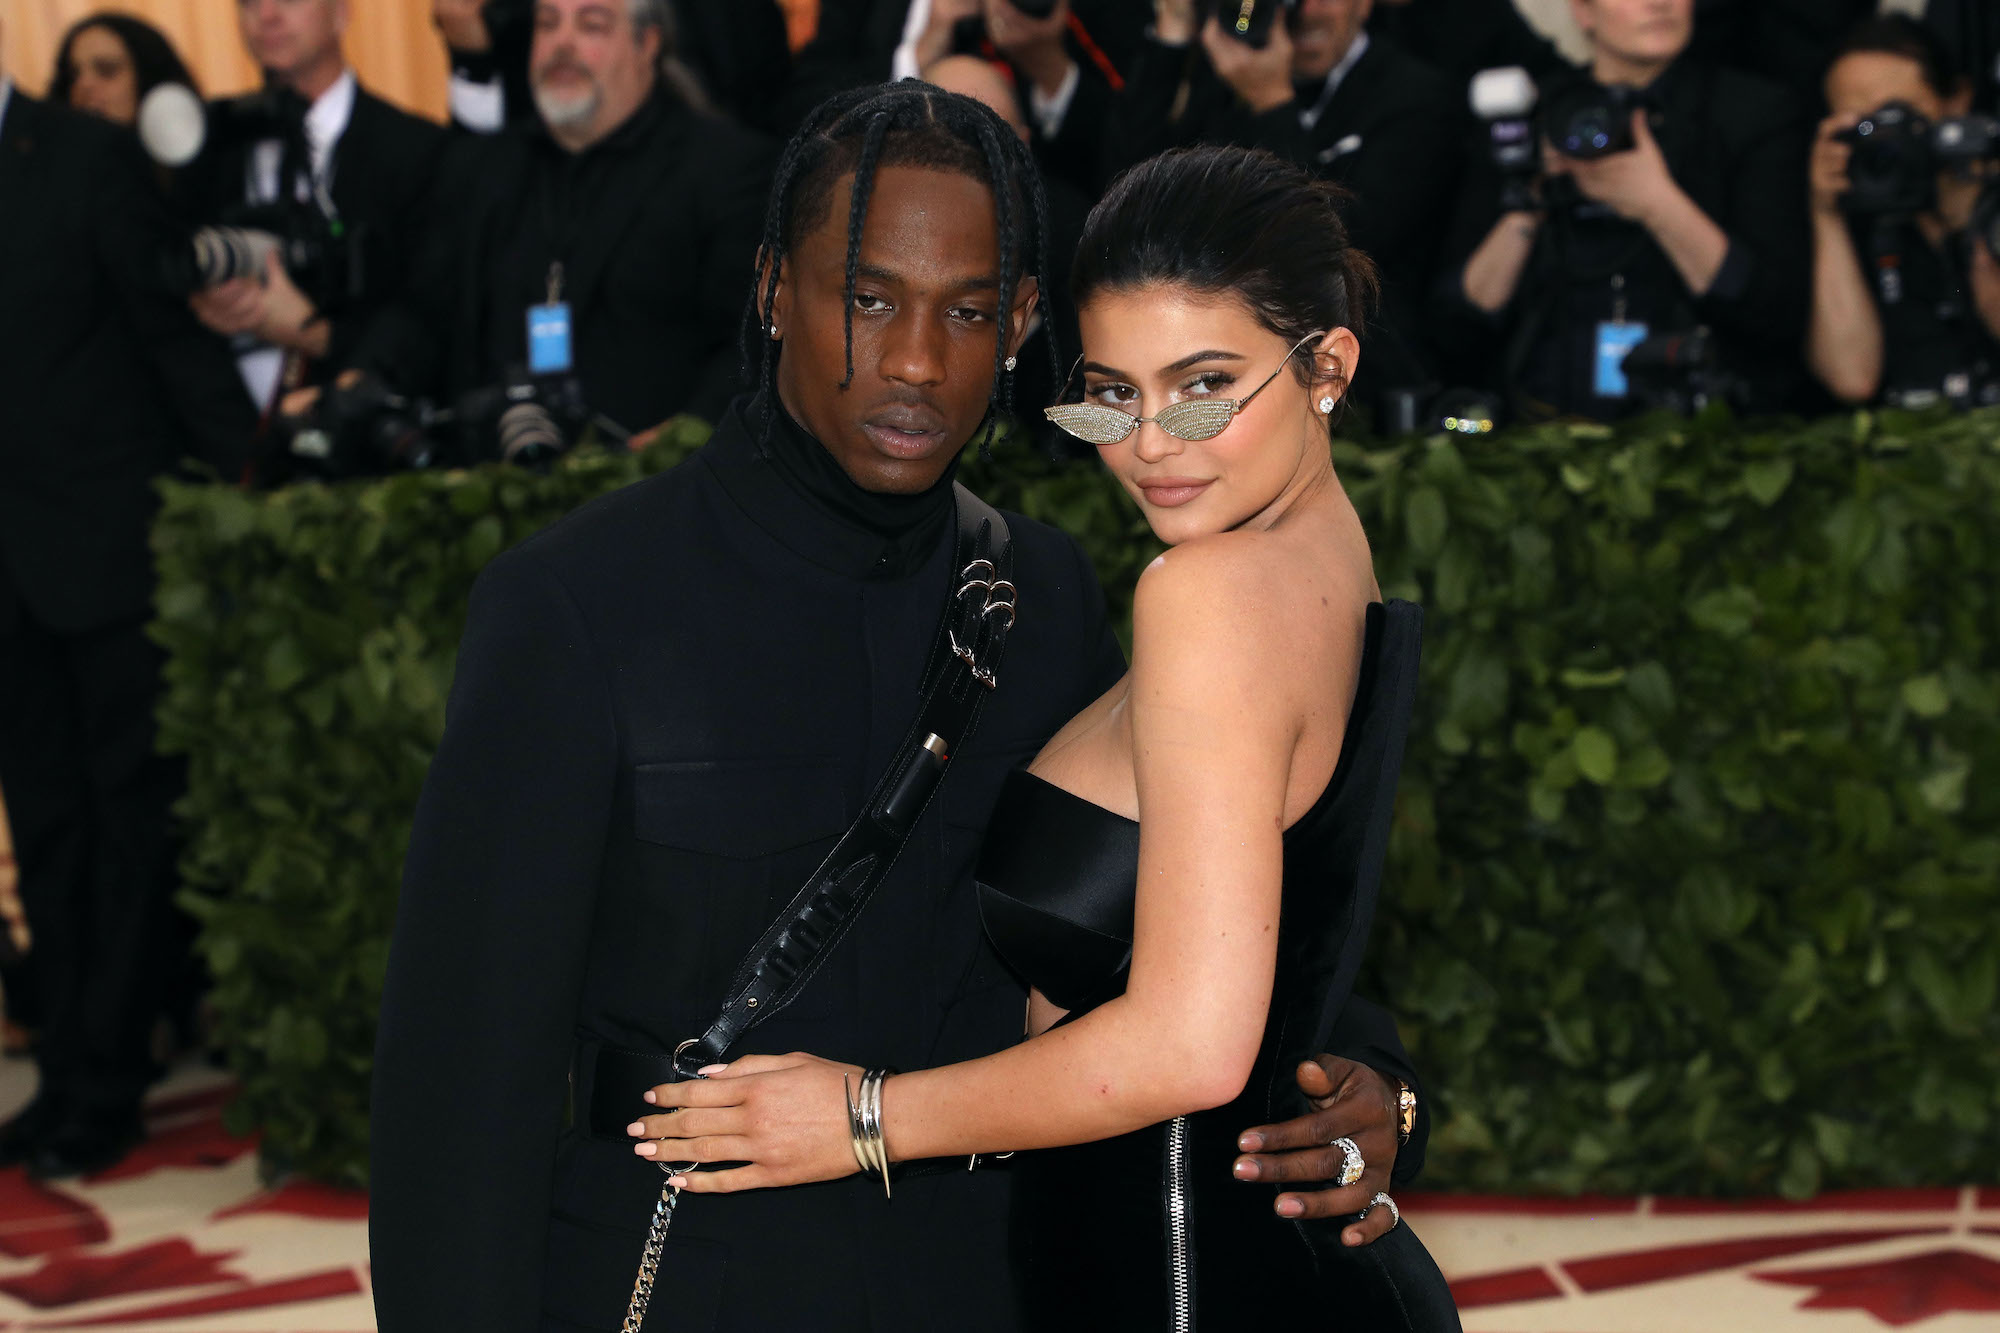 Kylie Jenner and Travis Scott not getting back together, only co-parenting